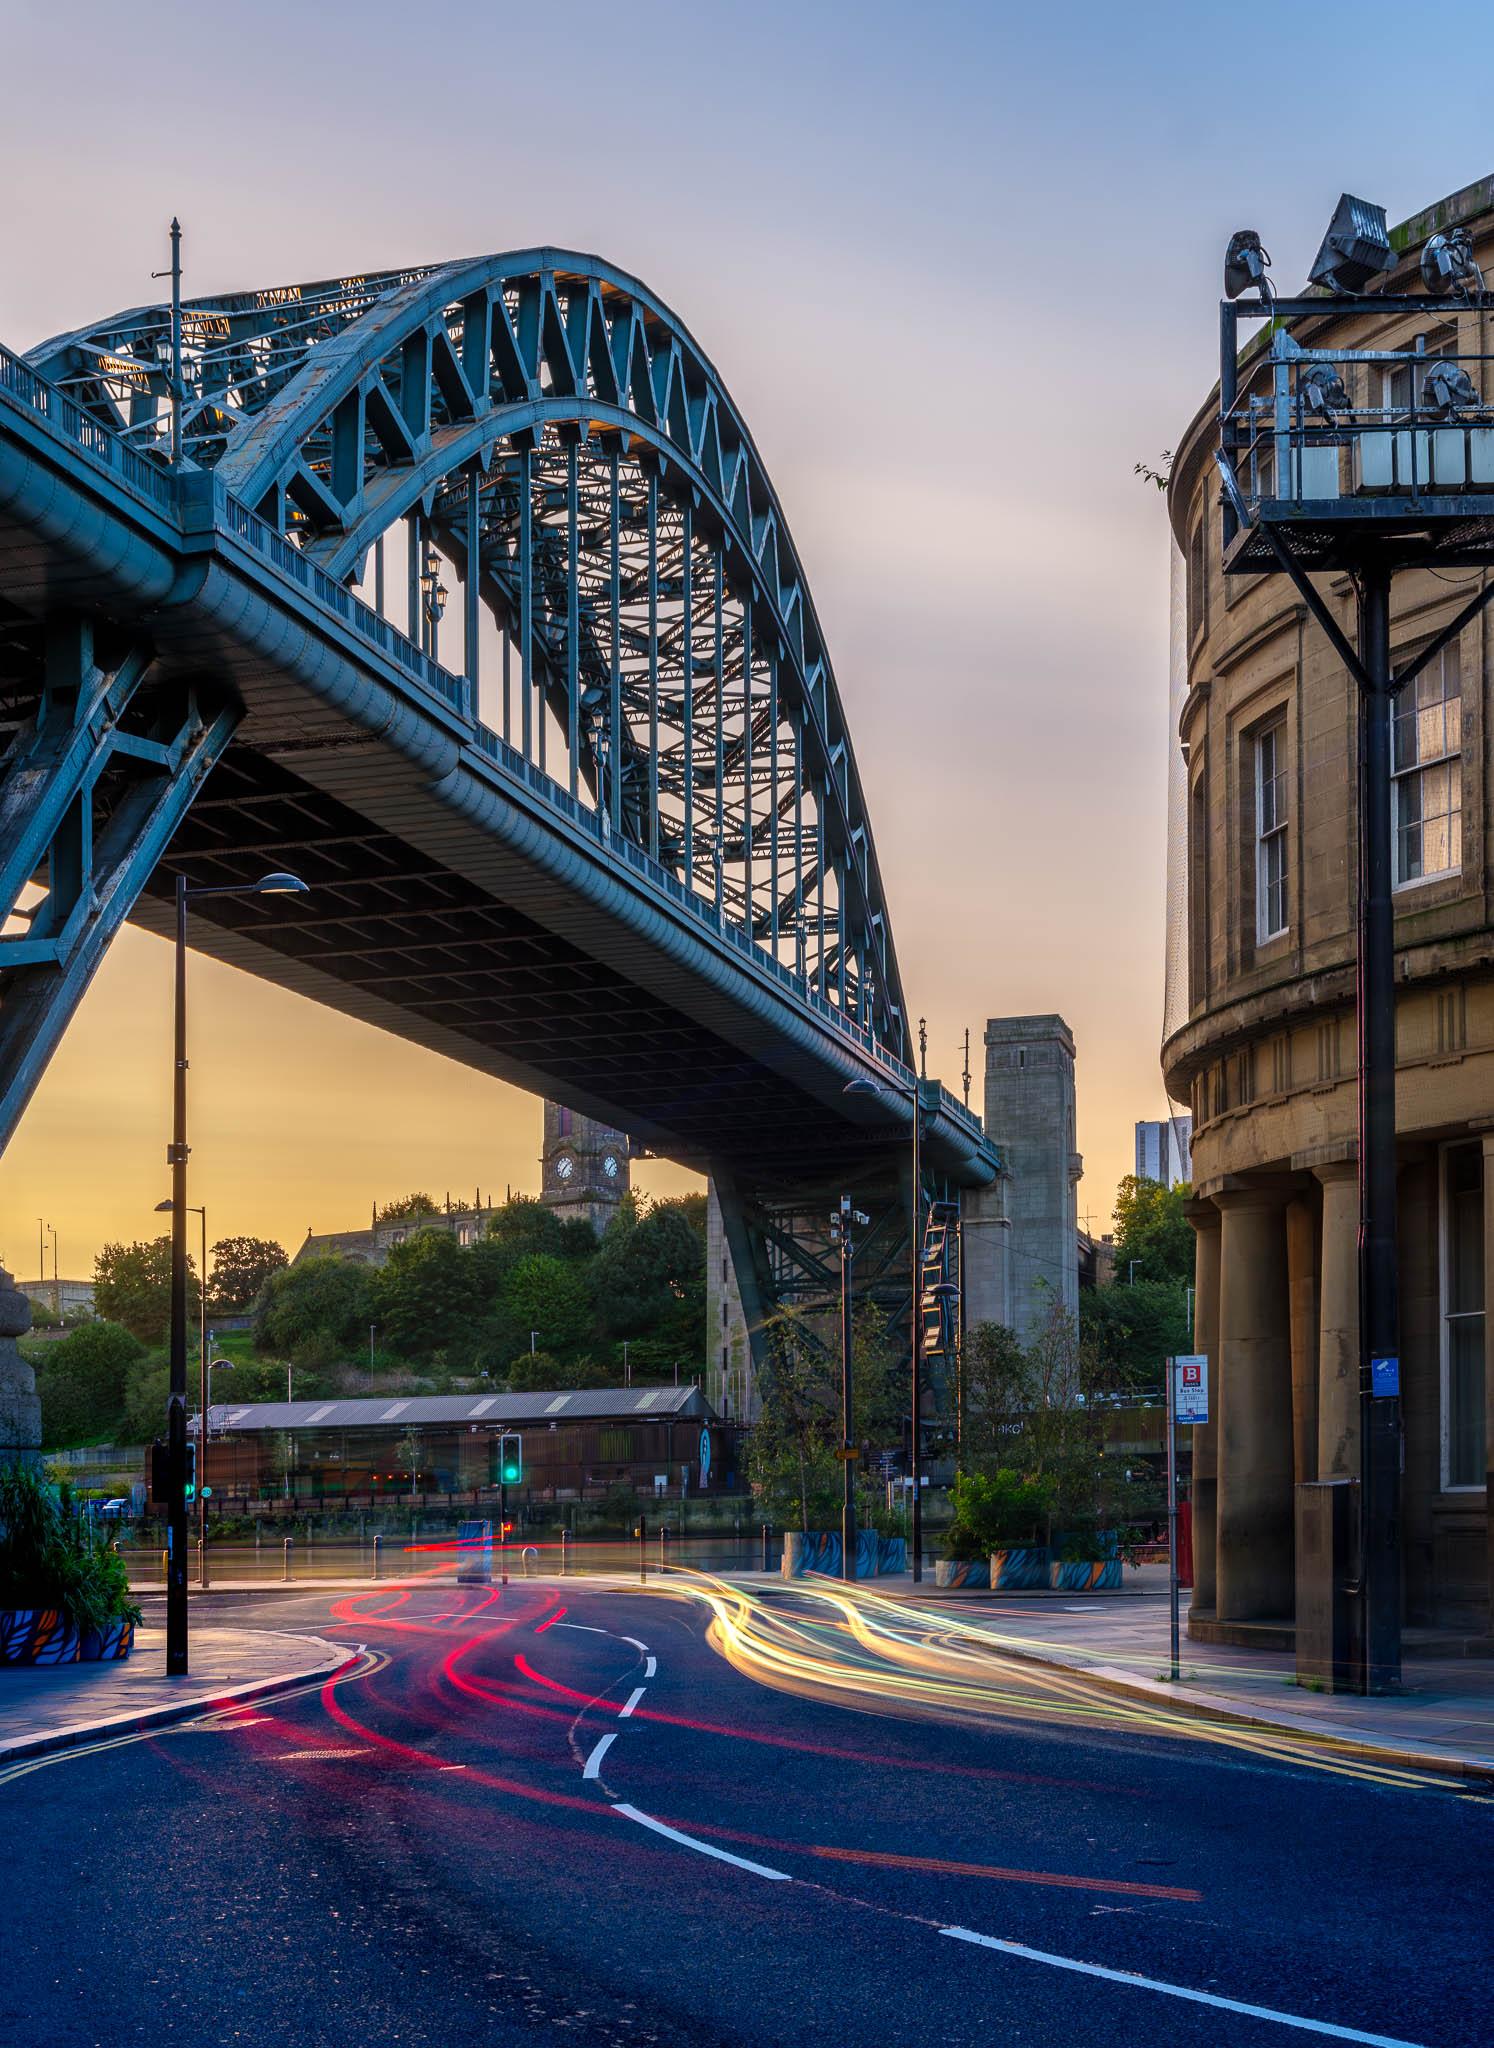 Car light trails under the Tyne Bridge in Newcastle during morning blue hour
